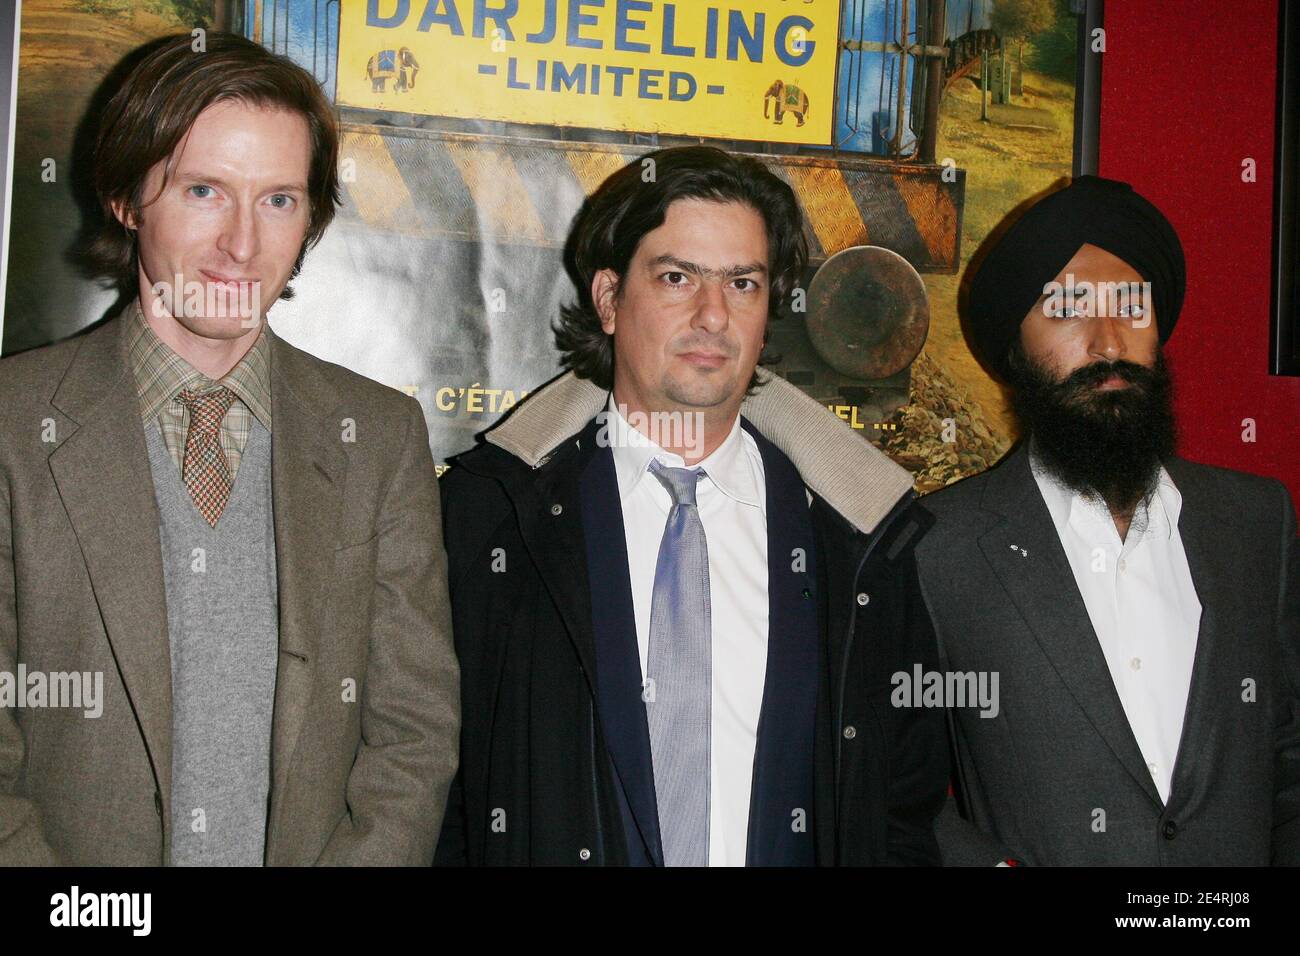 Director Wes Anderson, producer Roman Coppola and actor Waris